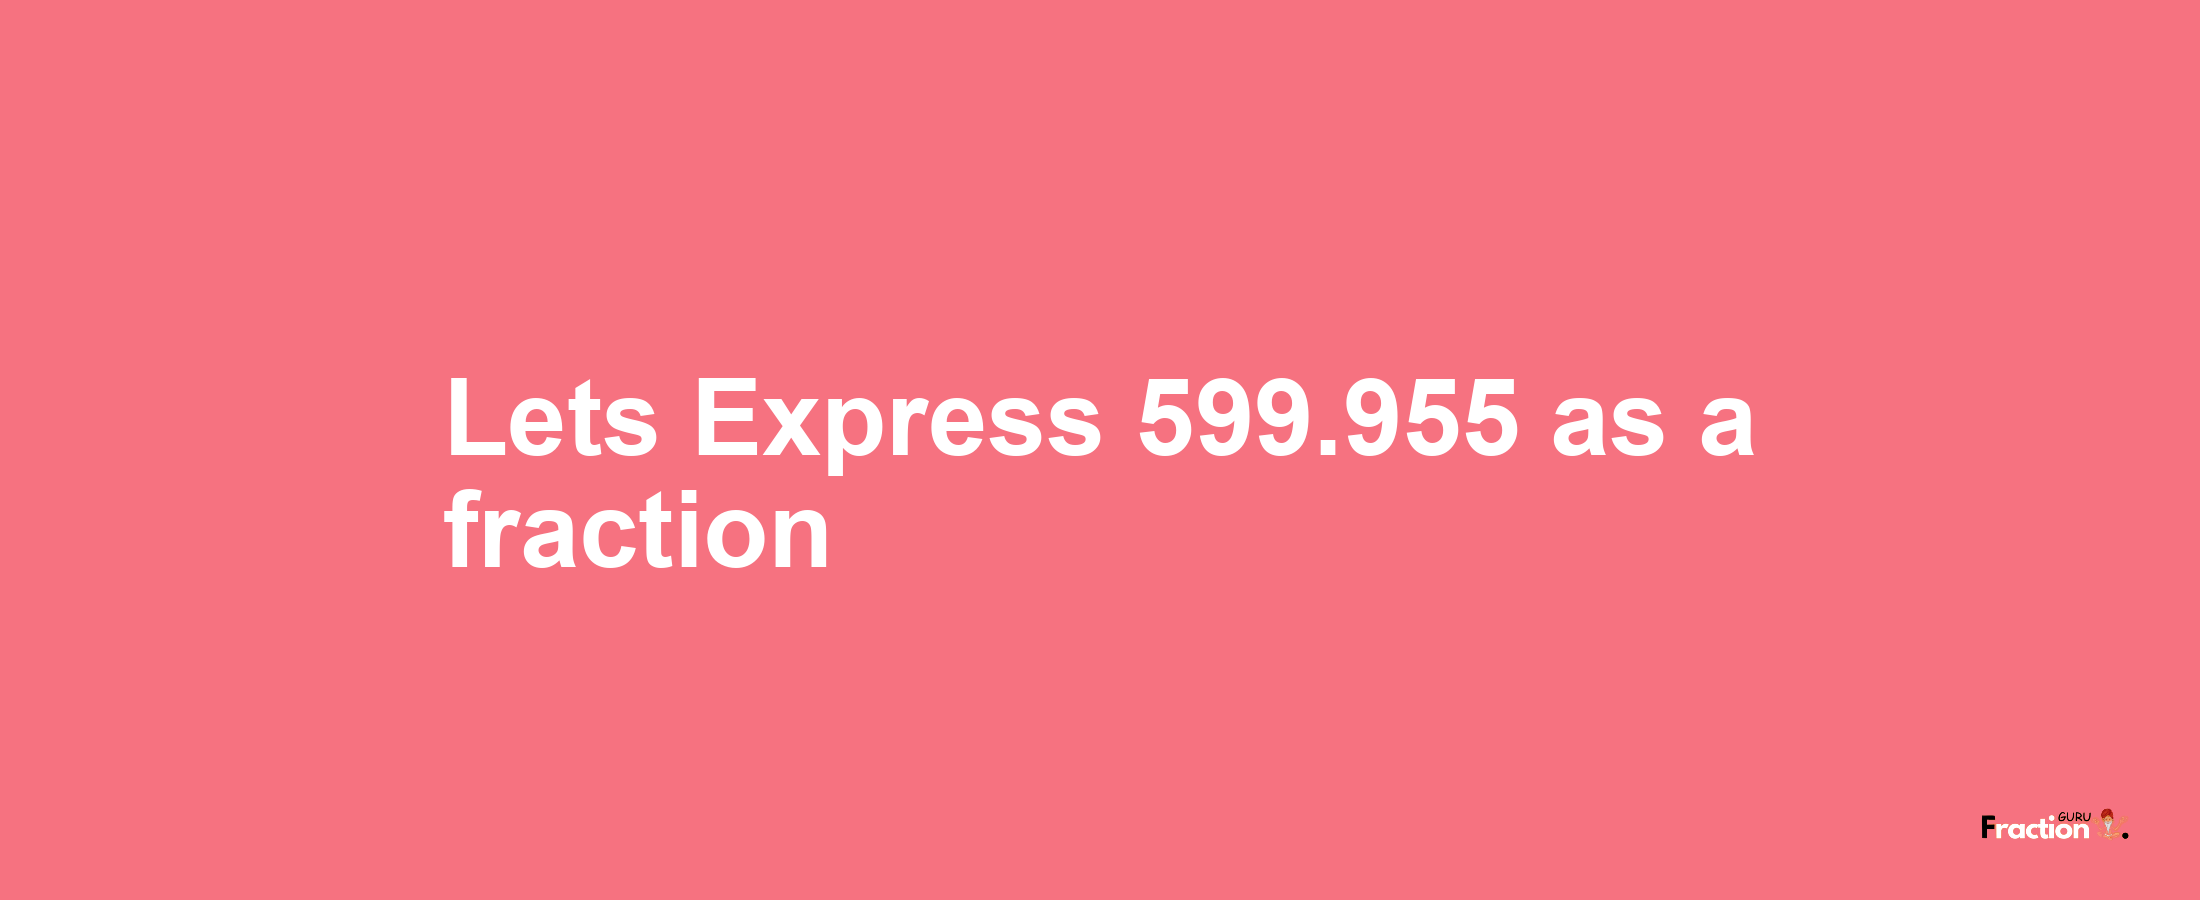 Lets Express 599.955 as afraction